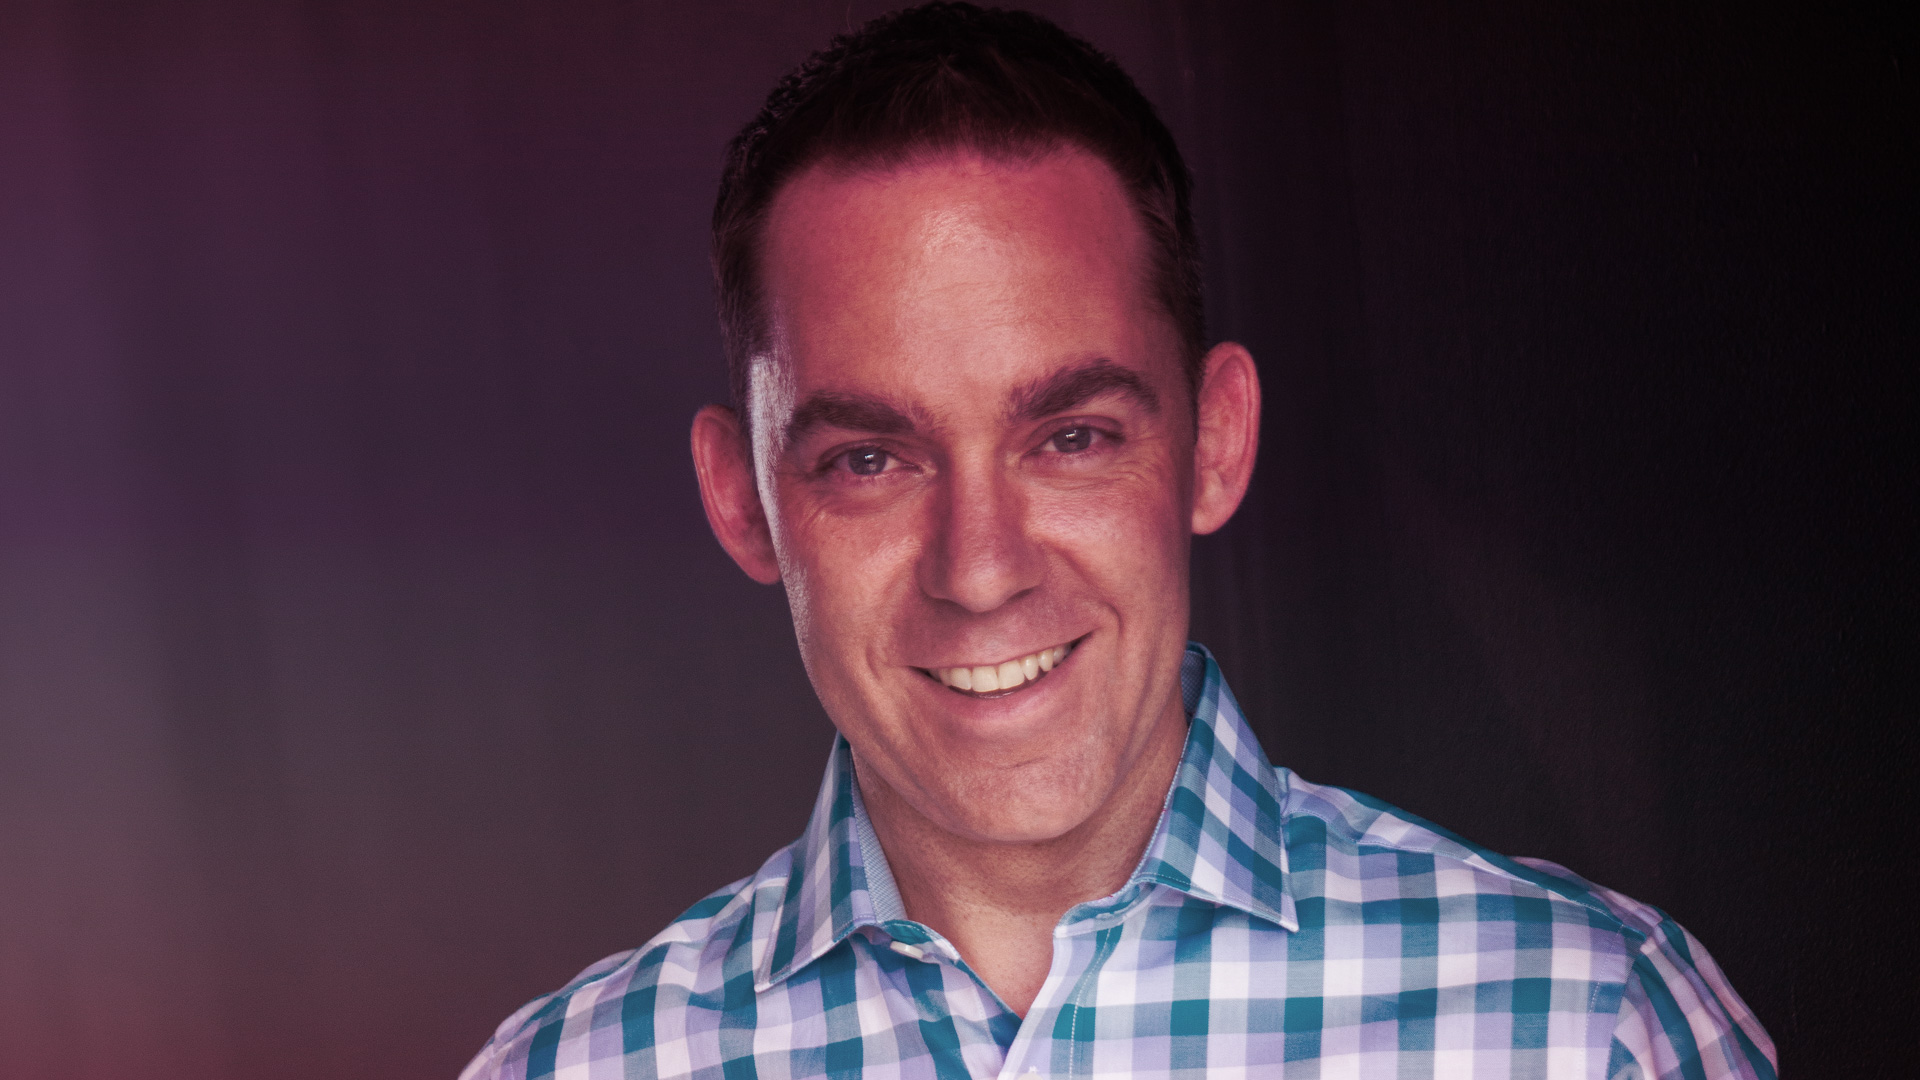 Podcast episode with Chip Klose, restaurant marketing strategist and podcast host